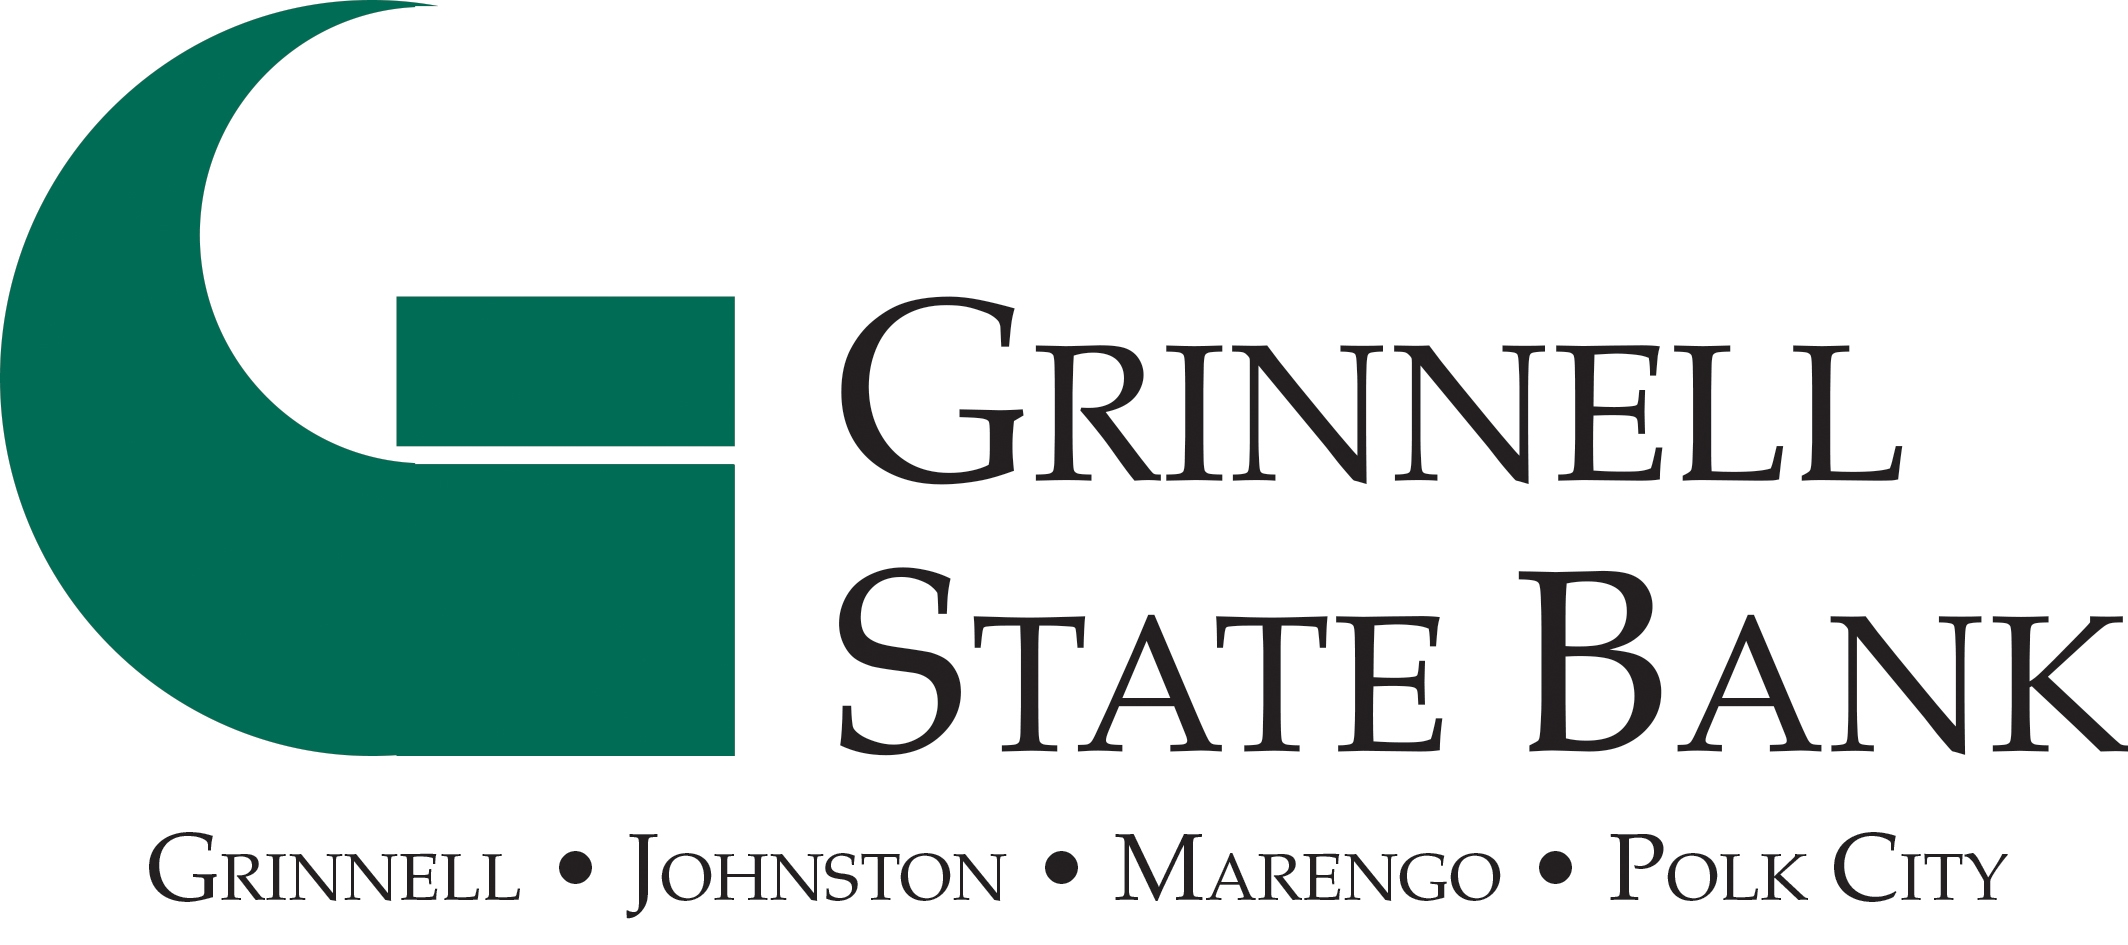 Grinnell State Bank Company Logo